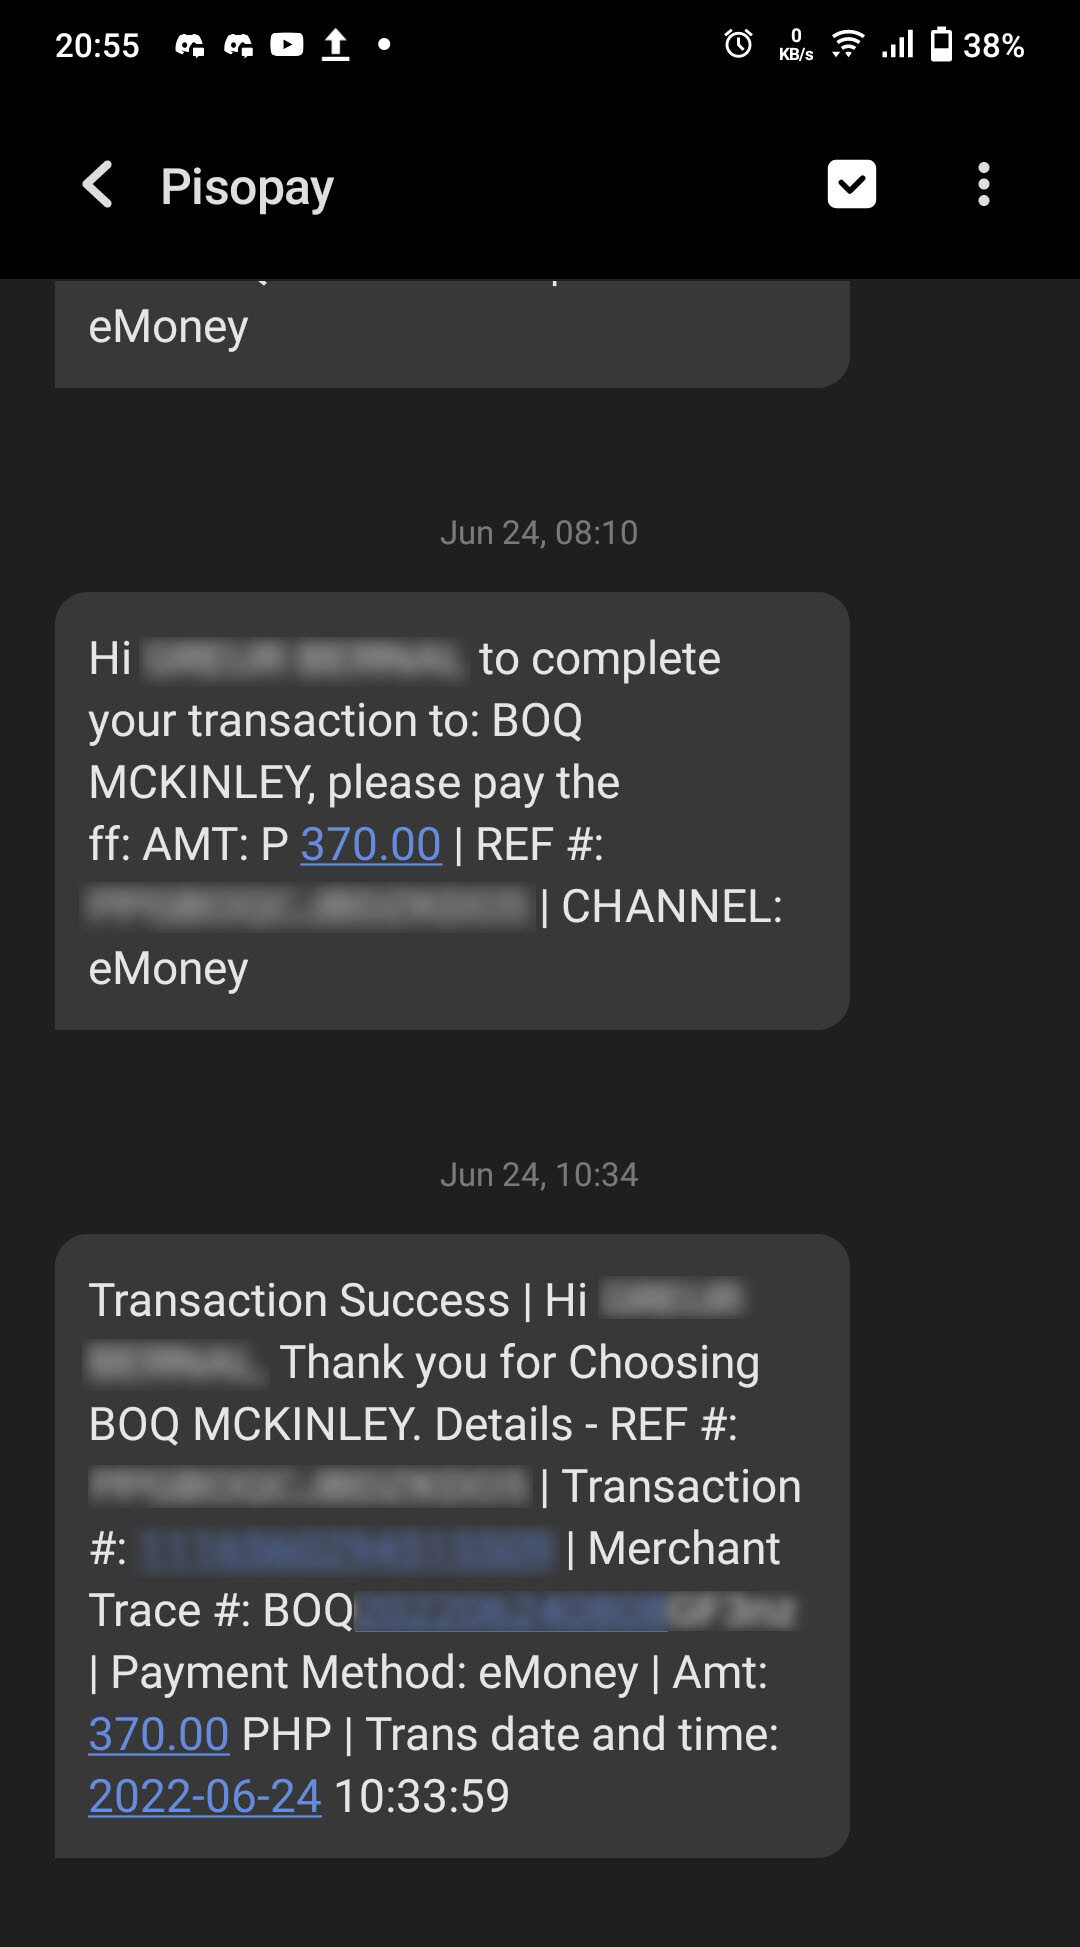 Pisopay SMS for the payment and acknowledgement receipt of payment of my BoQ ICV